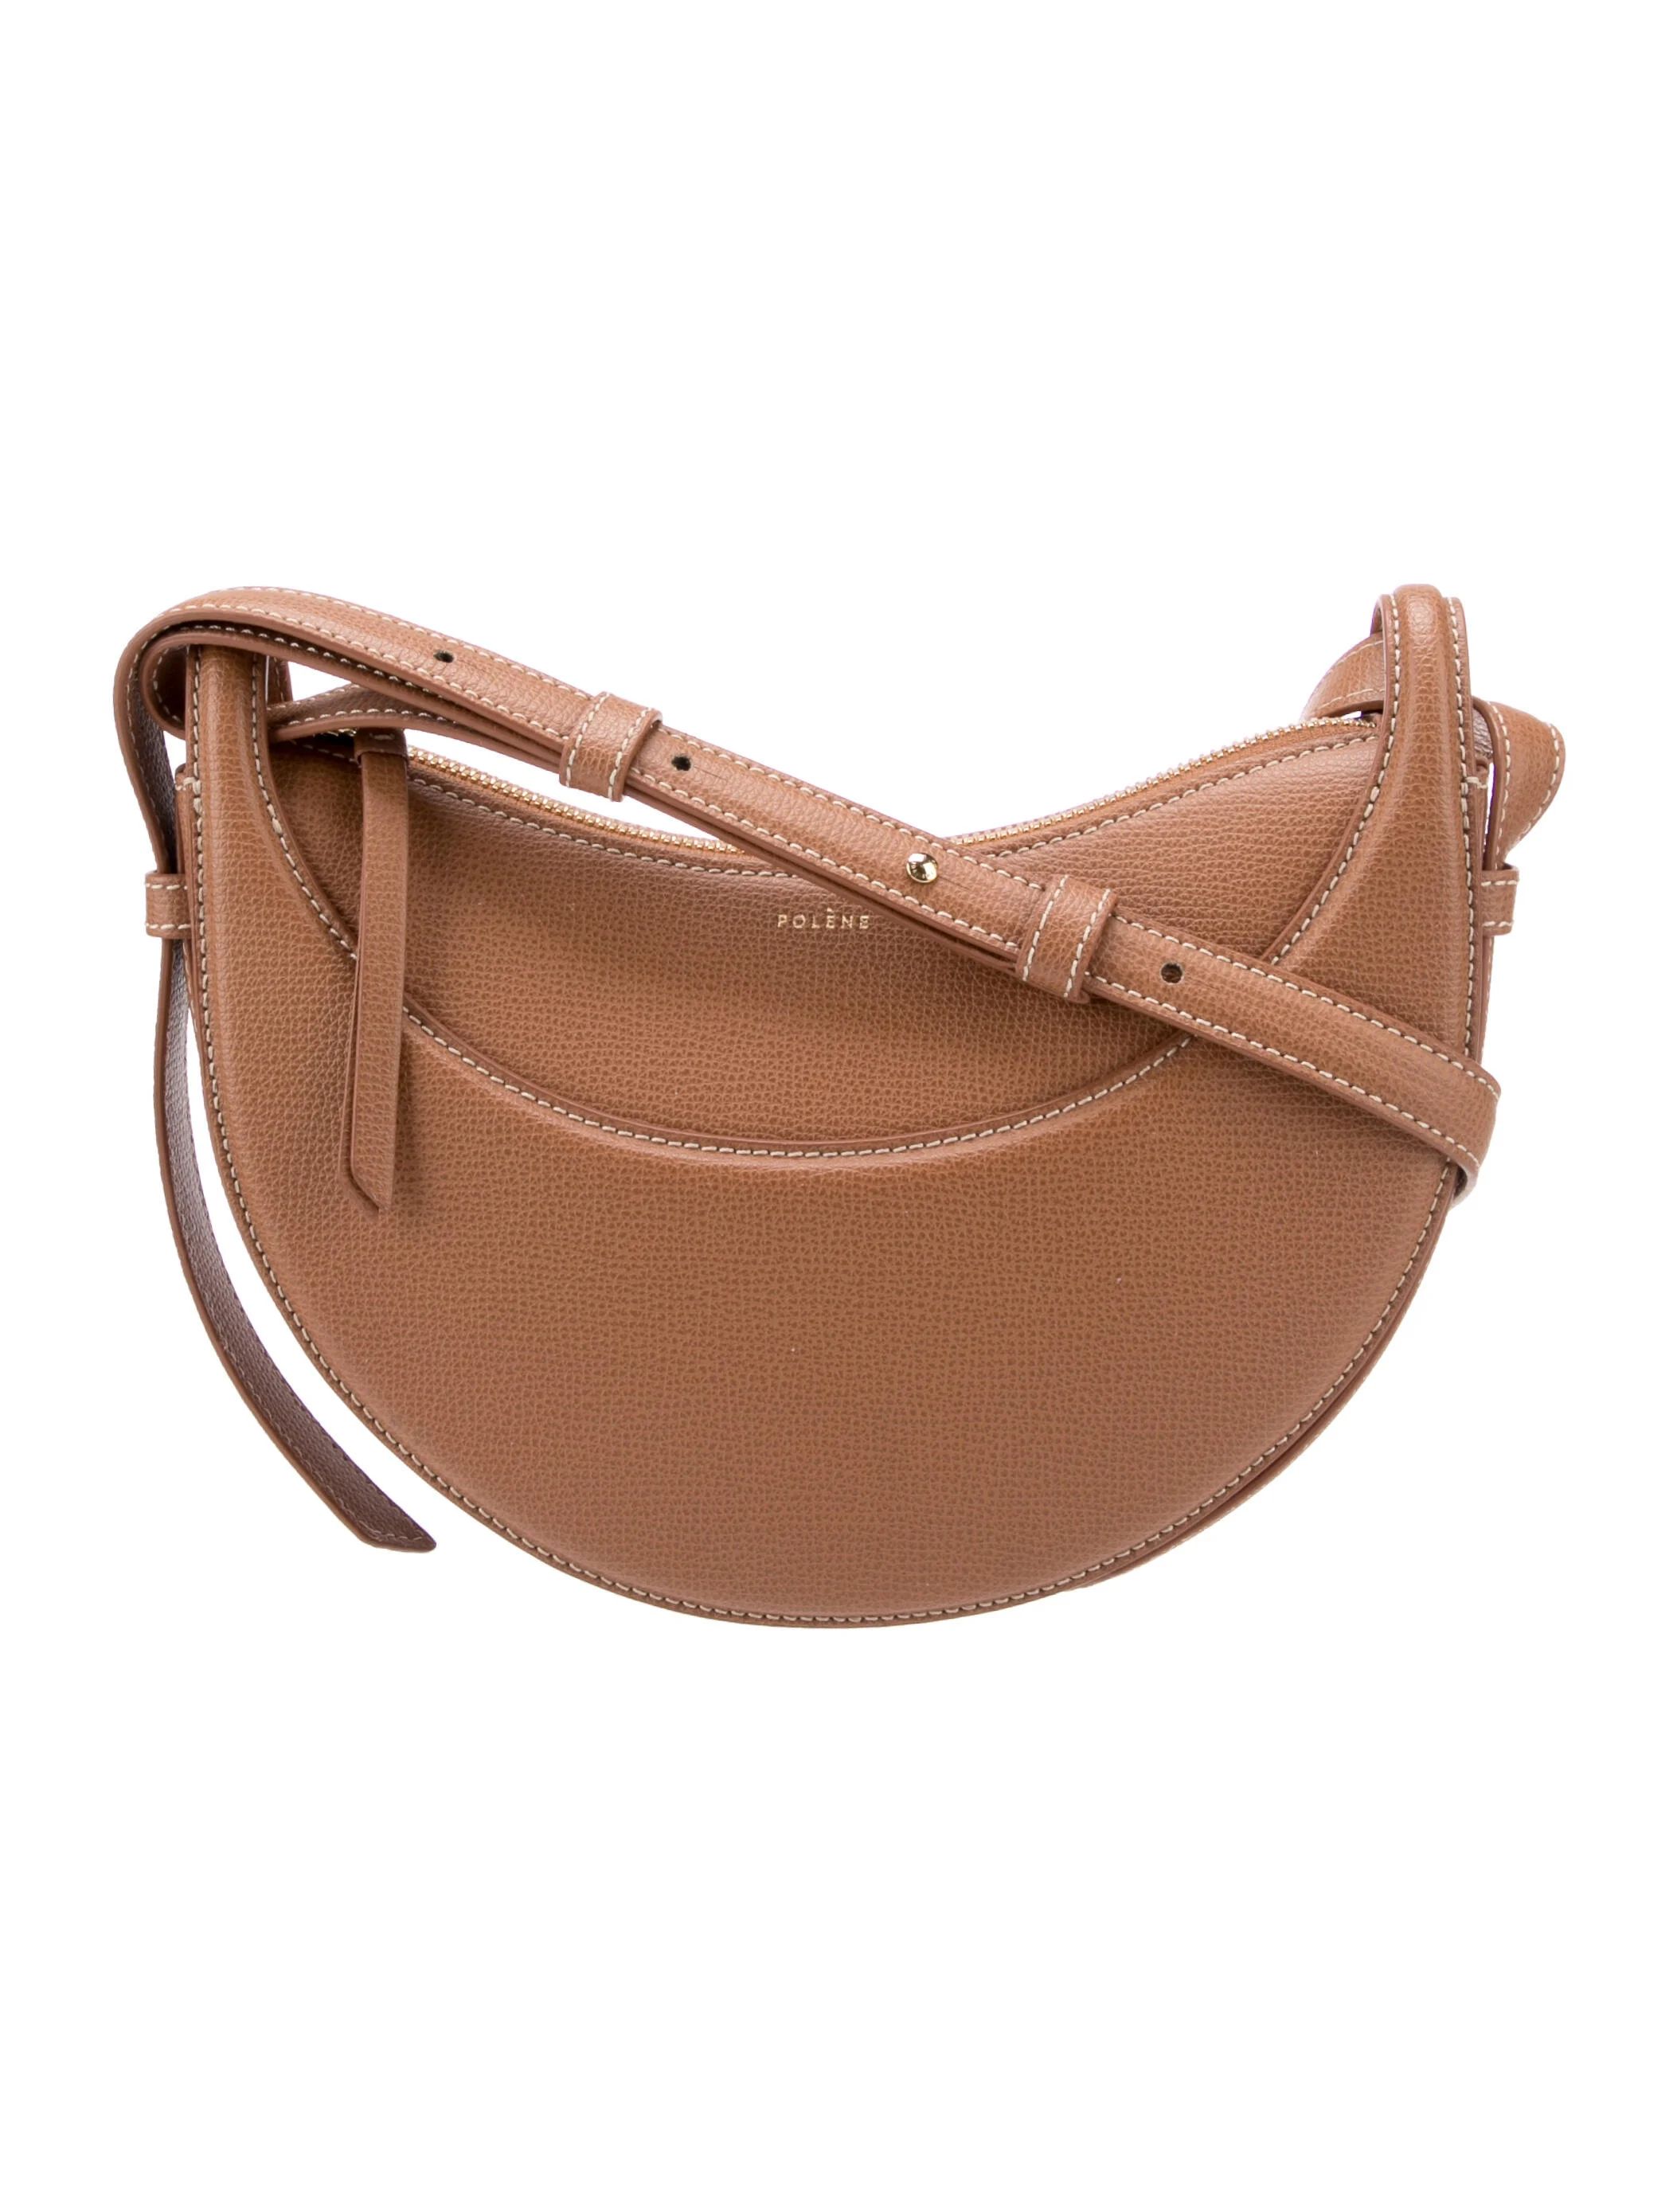 Numero Dix Leather Shoulder Bag | The RealReal